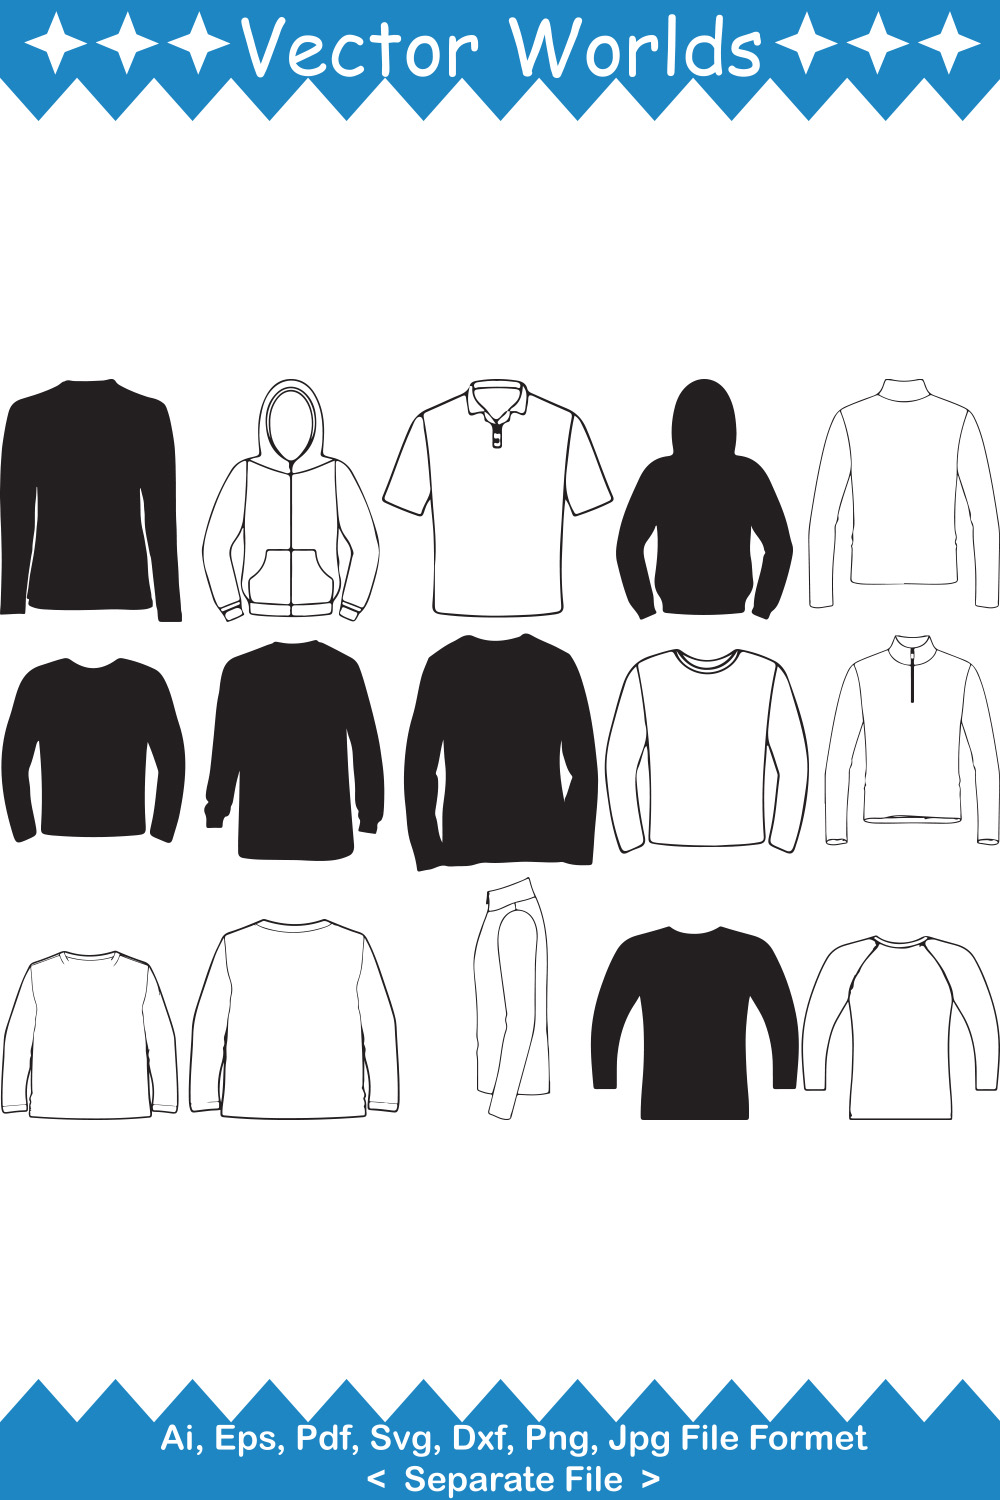 Bundle of vector amazing images of silhouettes of long sleeve shirts.